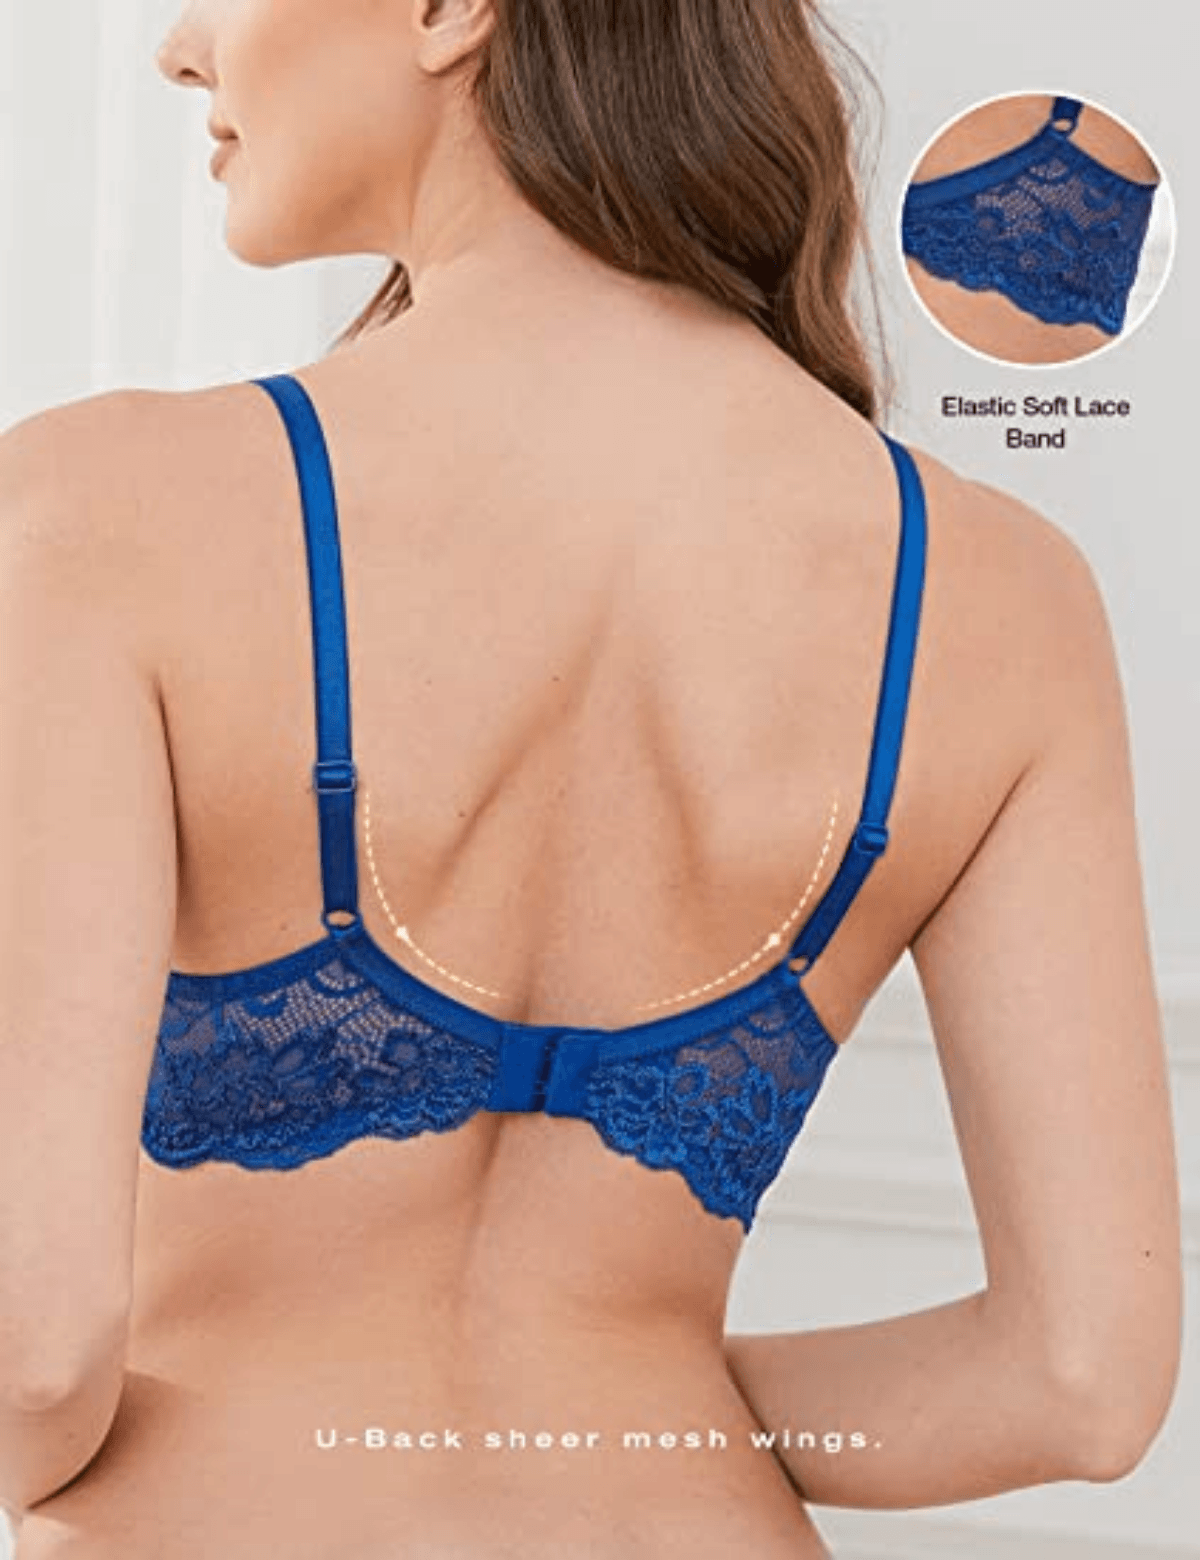 Lace and elastic band push-up bra